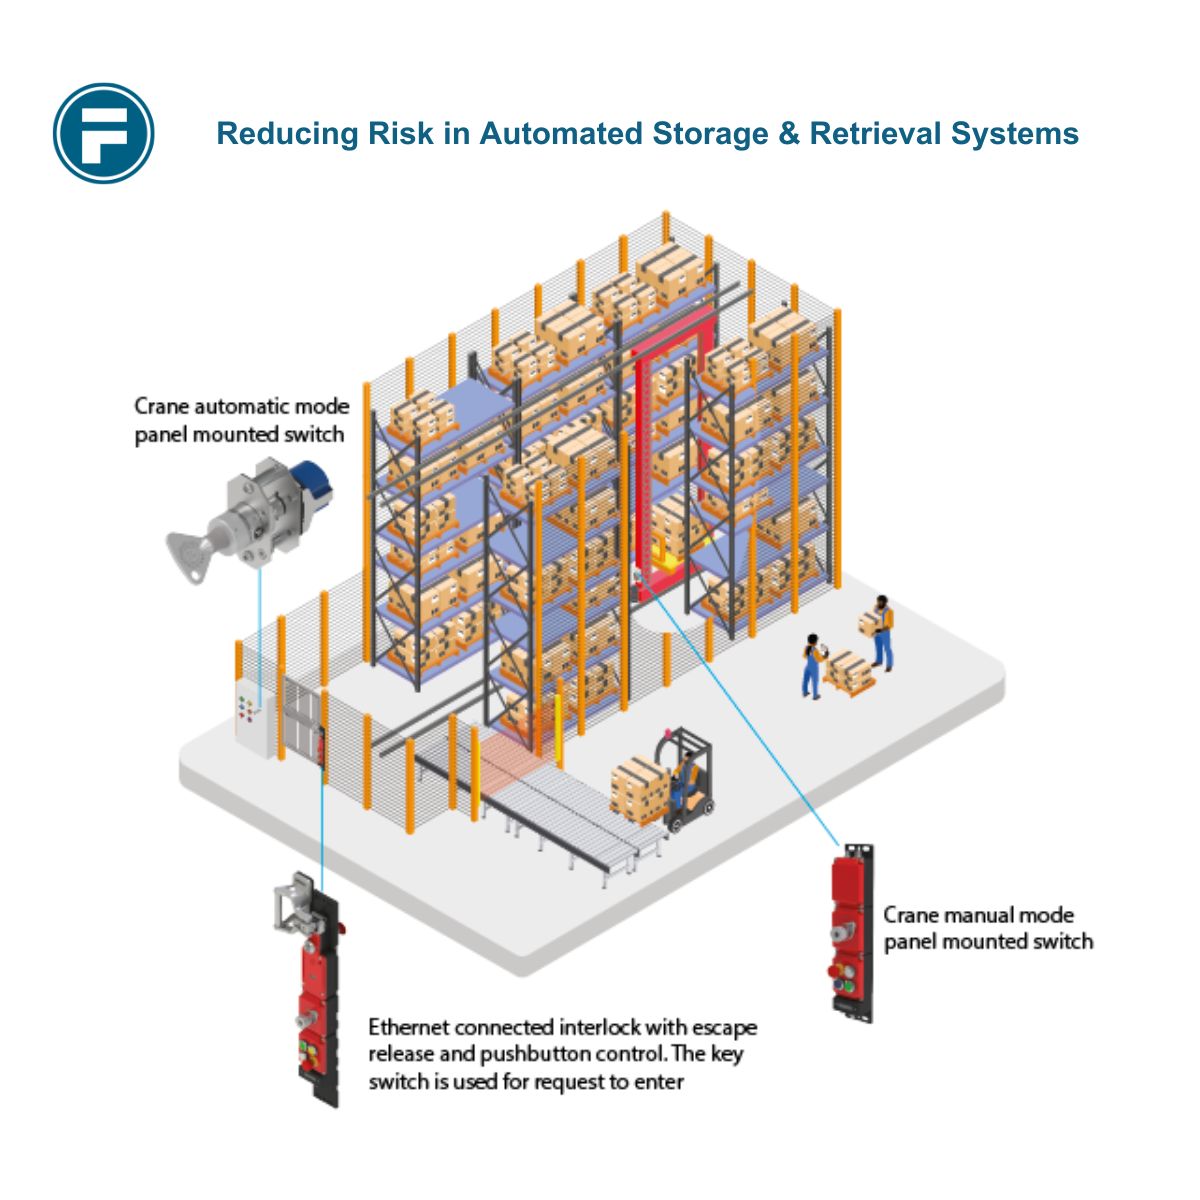 Reducing Risk in Automated Storage & Retrieval Systems (ASRS)